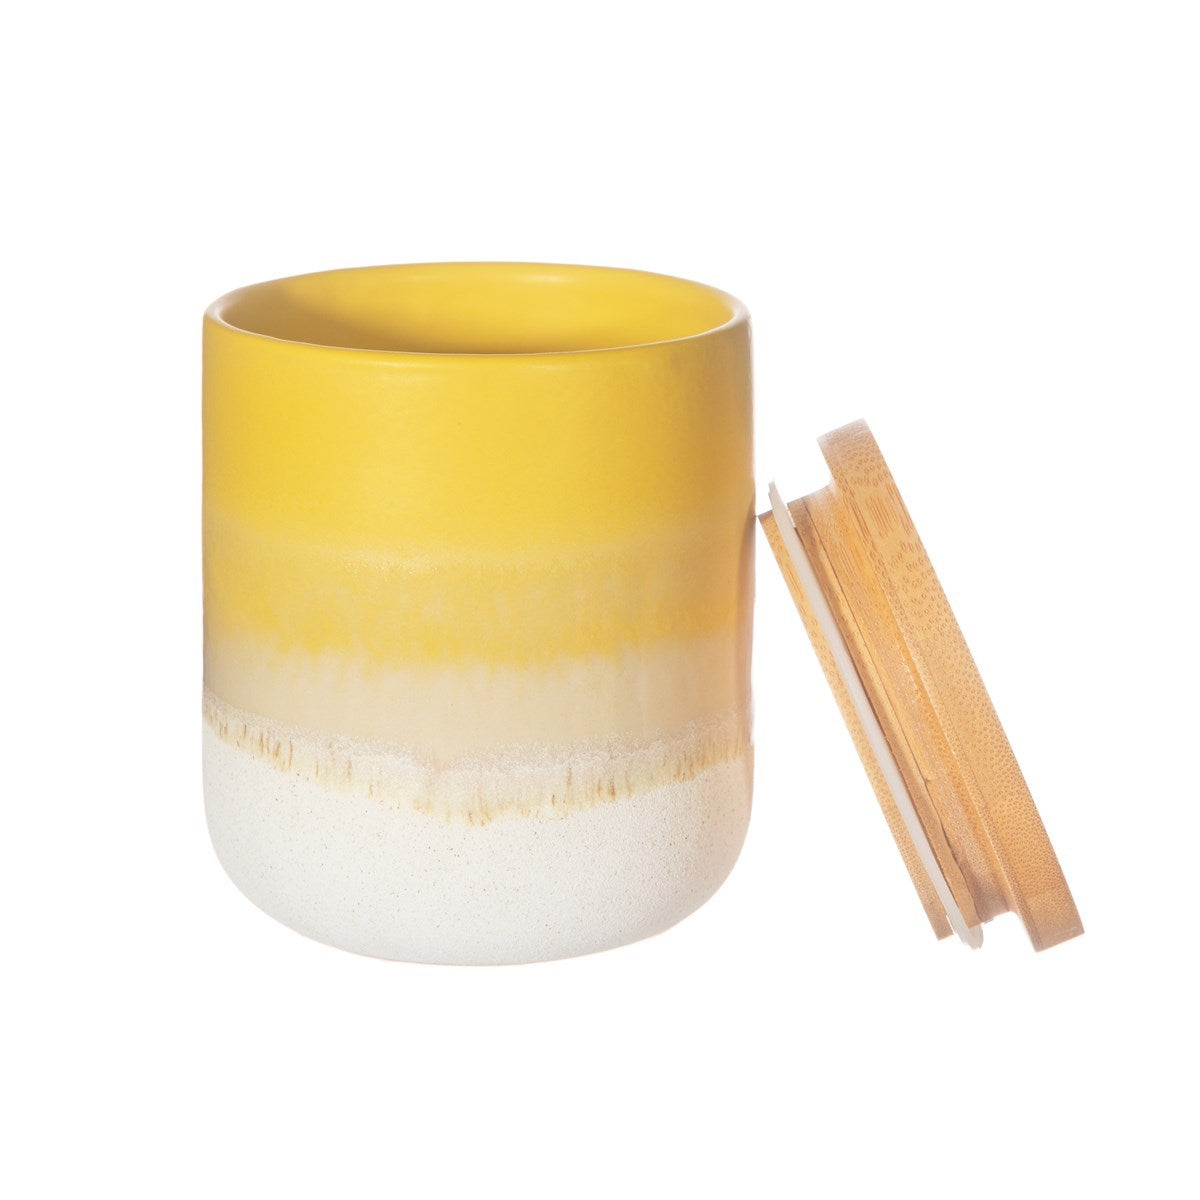 Sass and Belle yellow dip glaze boho style ceramic storage pot with wooden lid